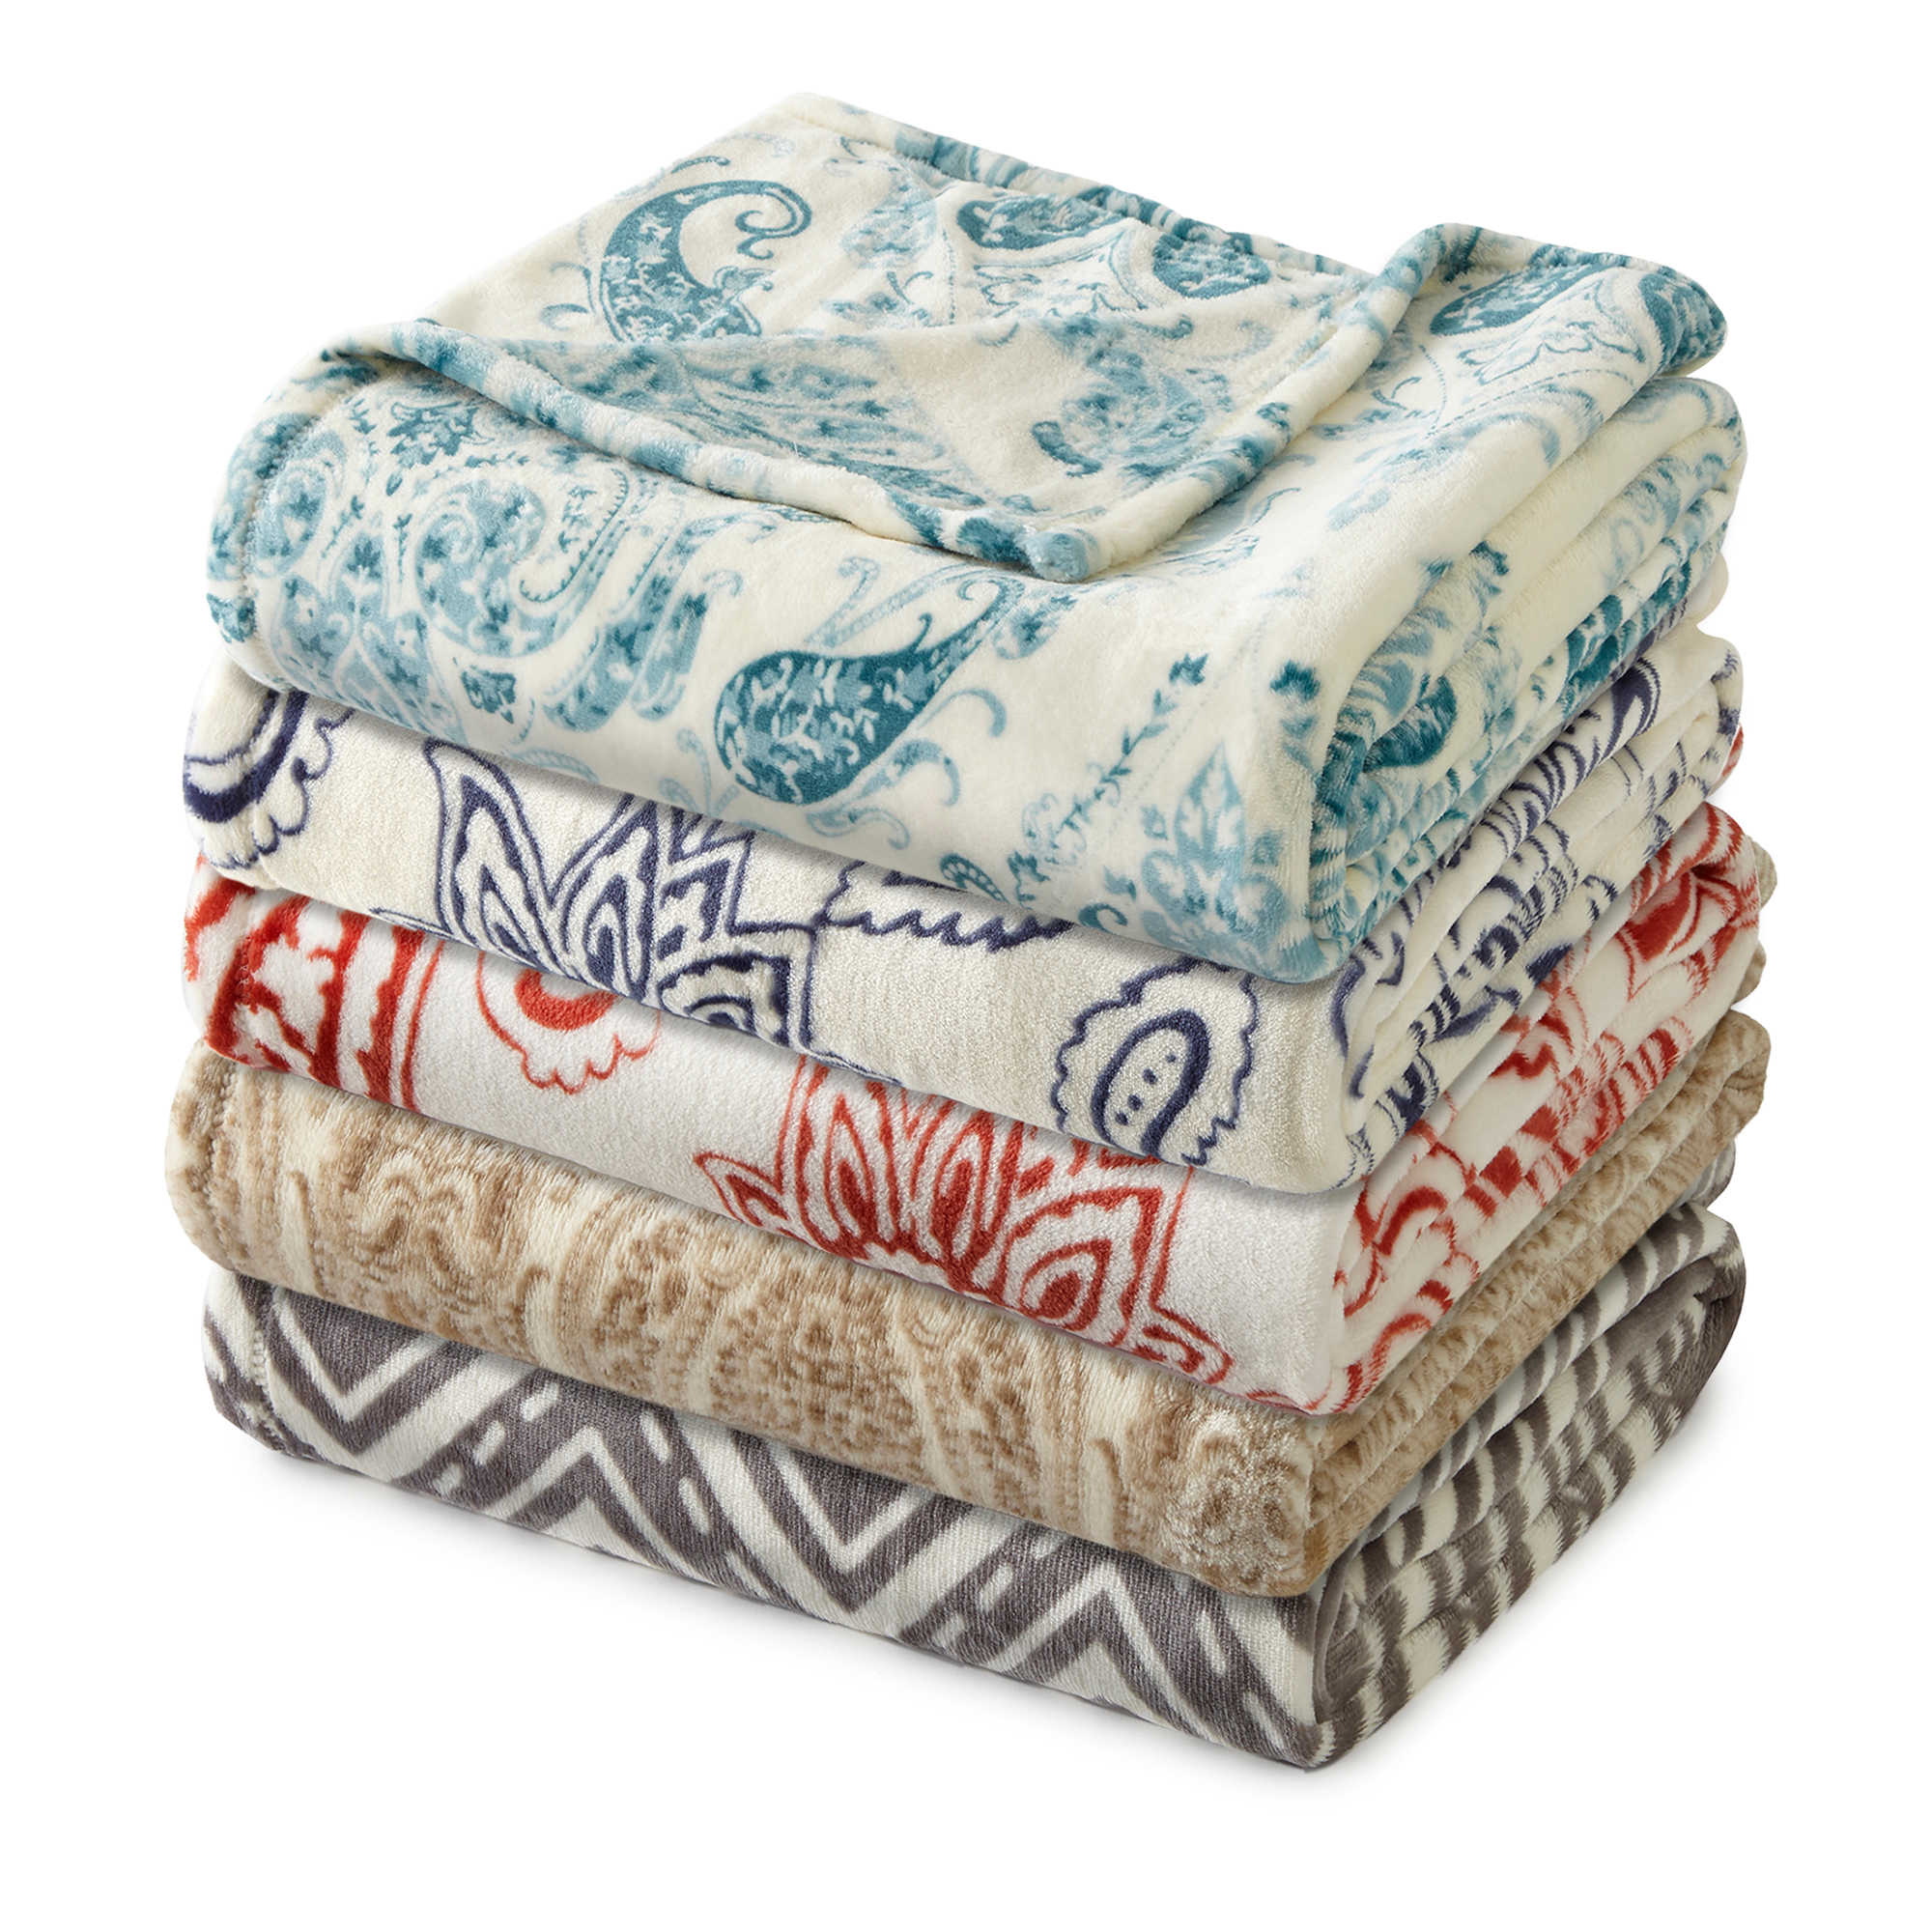 Bed Bath & Beyond: Select throw blankets for $10